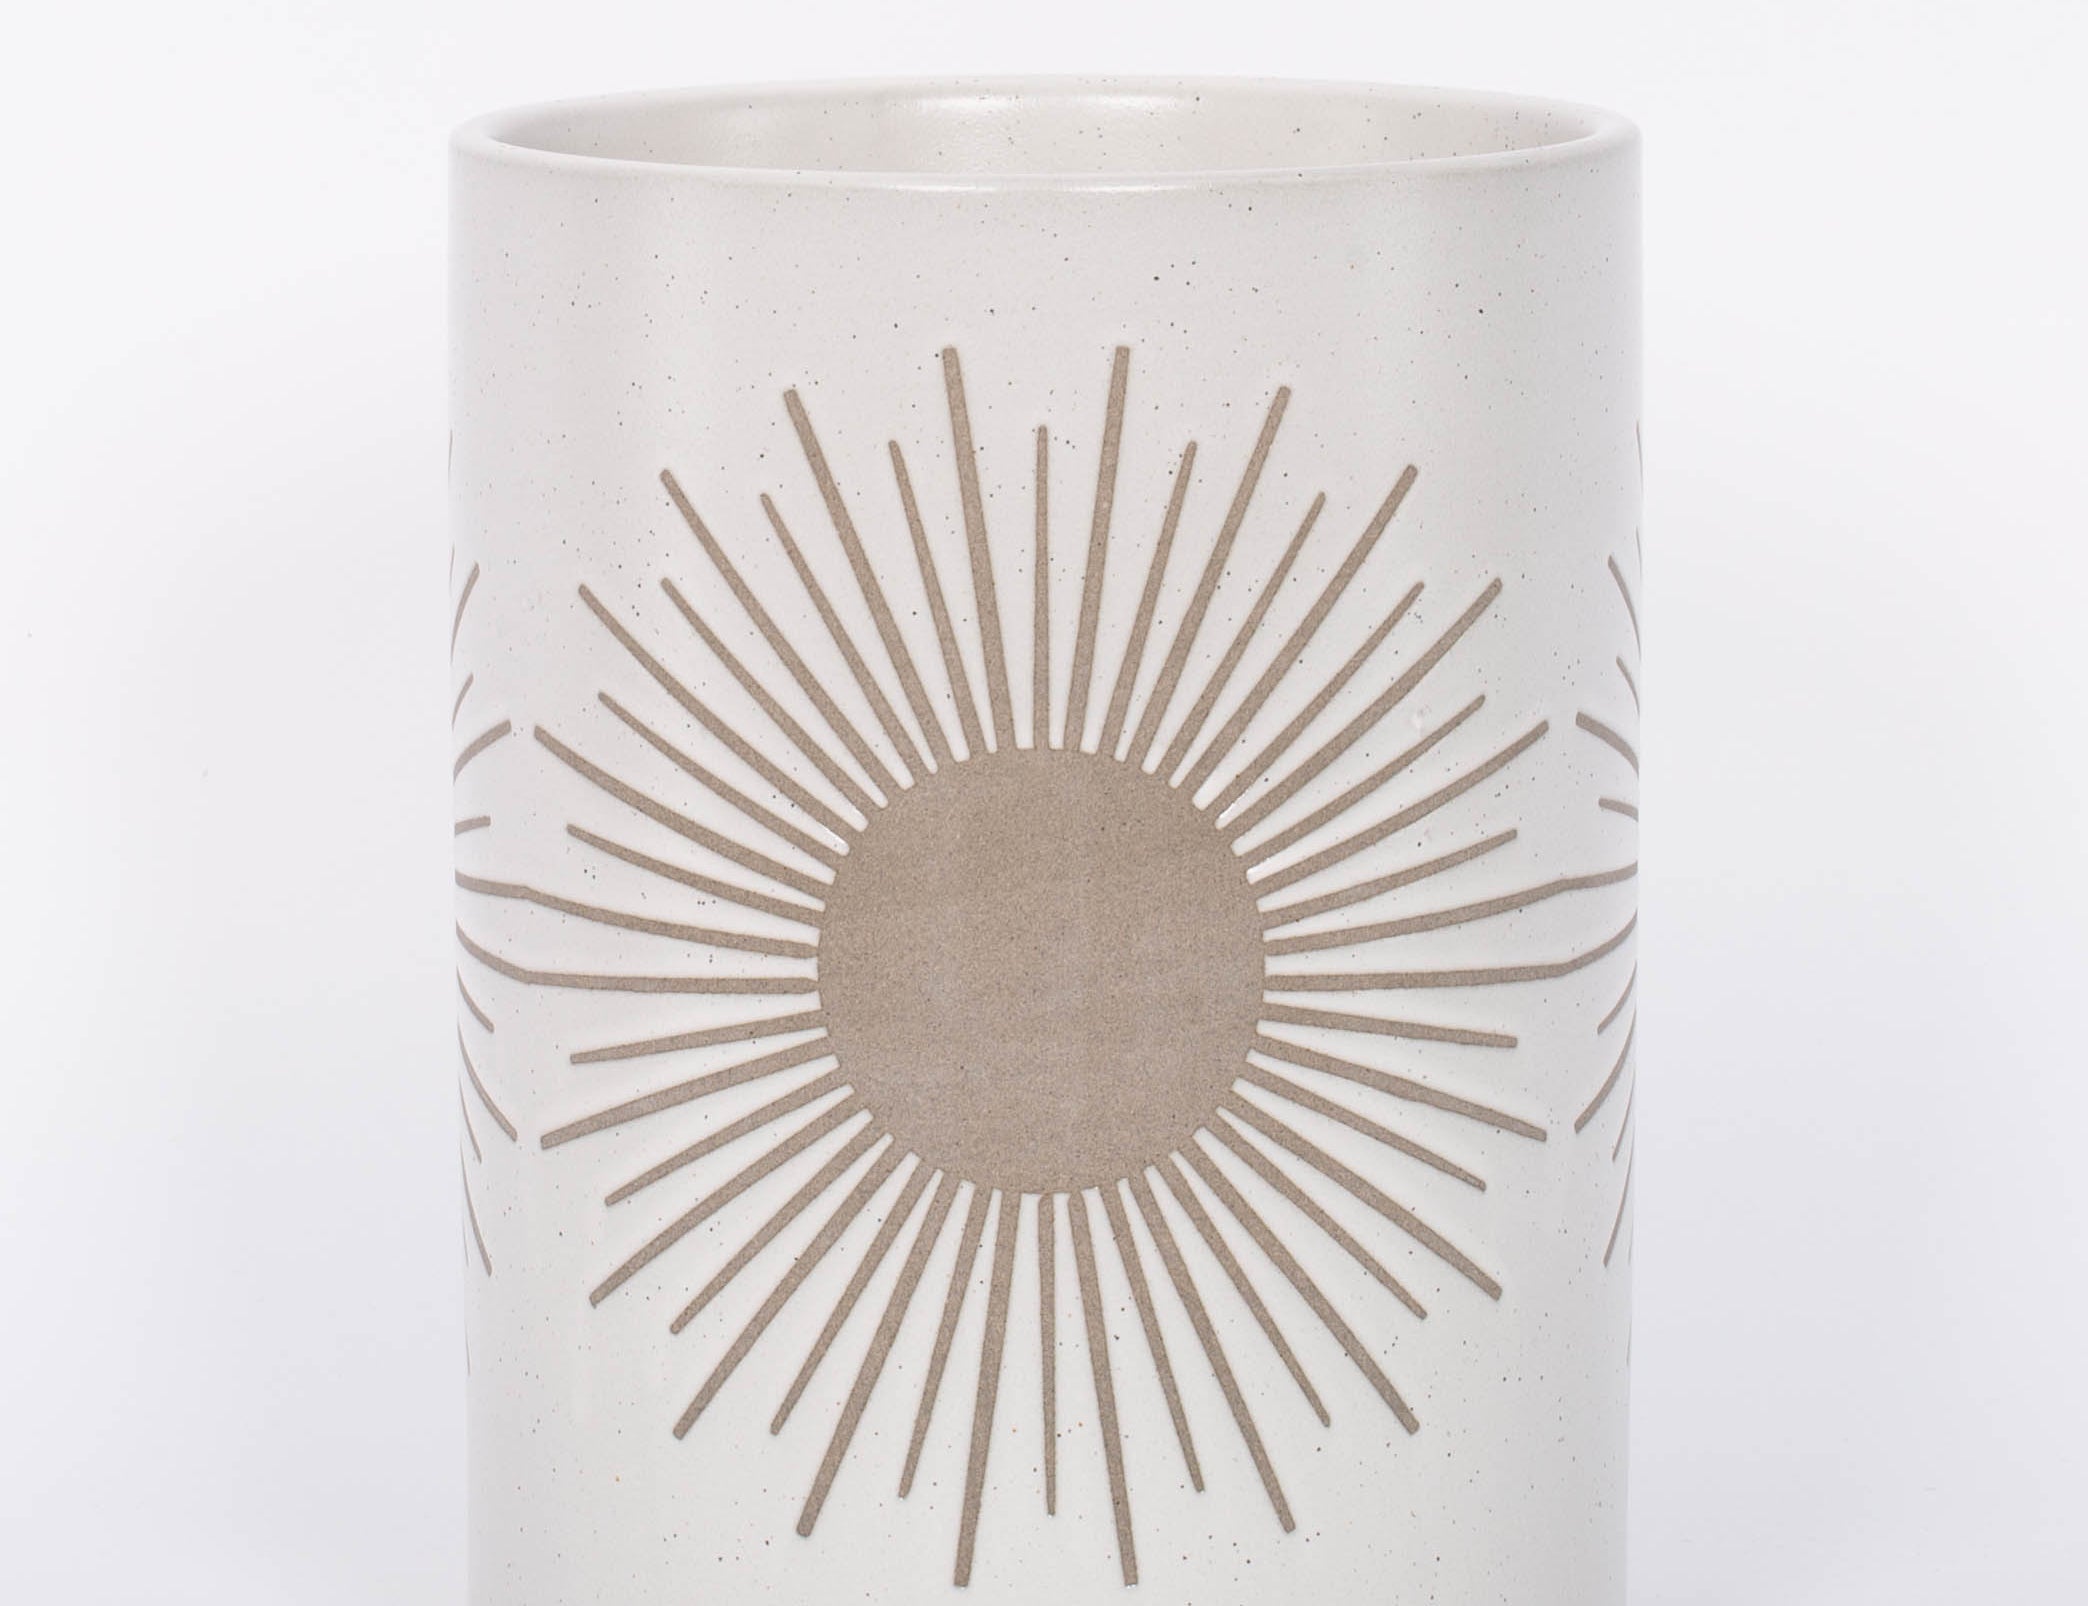 Large Sunrise to Sunset planter Pot by Citrine with golden sun design on natural white. 